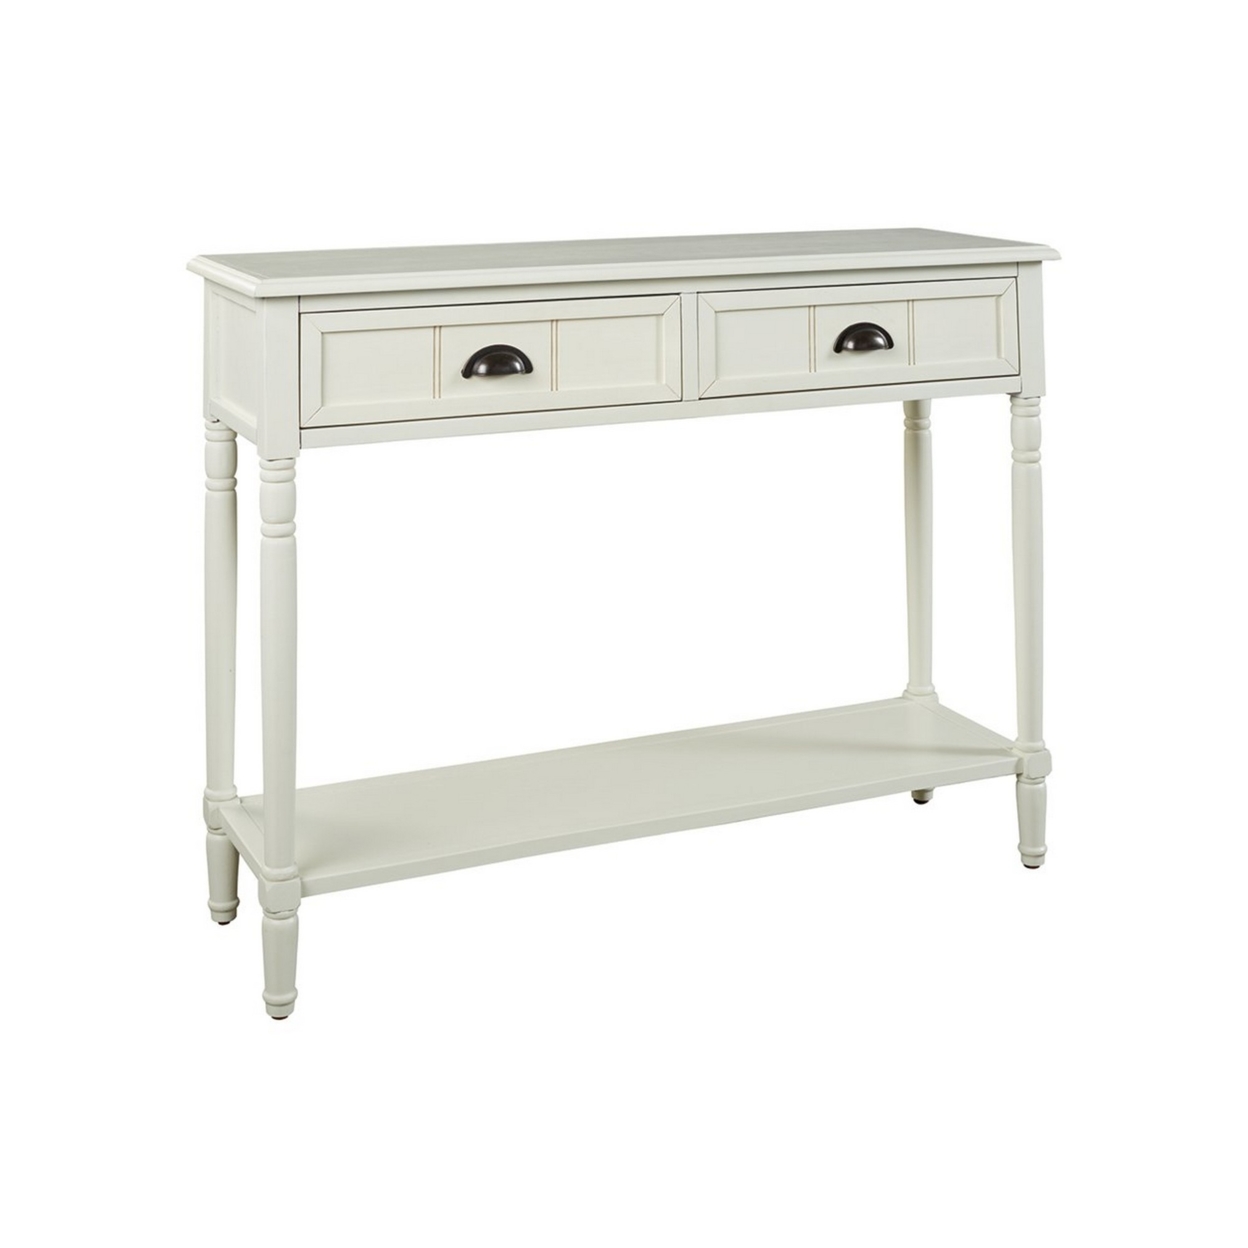 2 Drawer Console Sofa Table With Cup Pulls And Turned Legs, White- Saltoro Sherpi